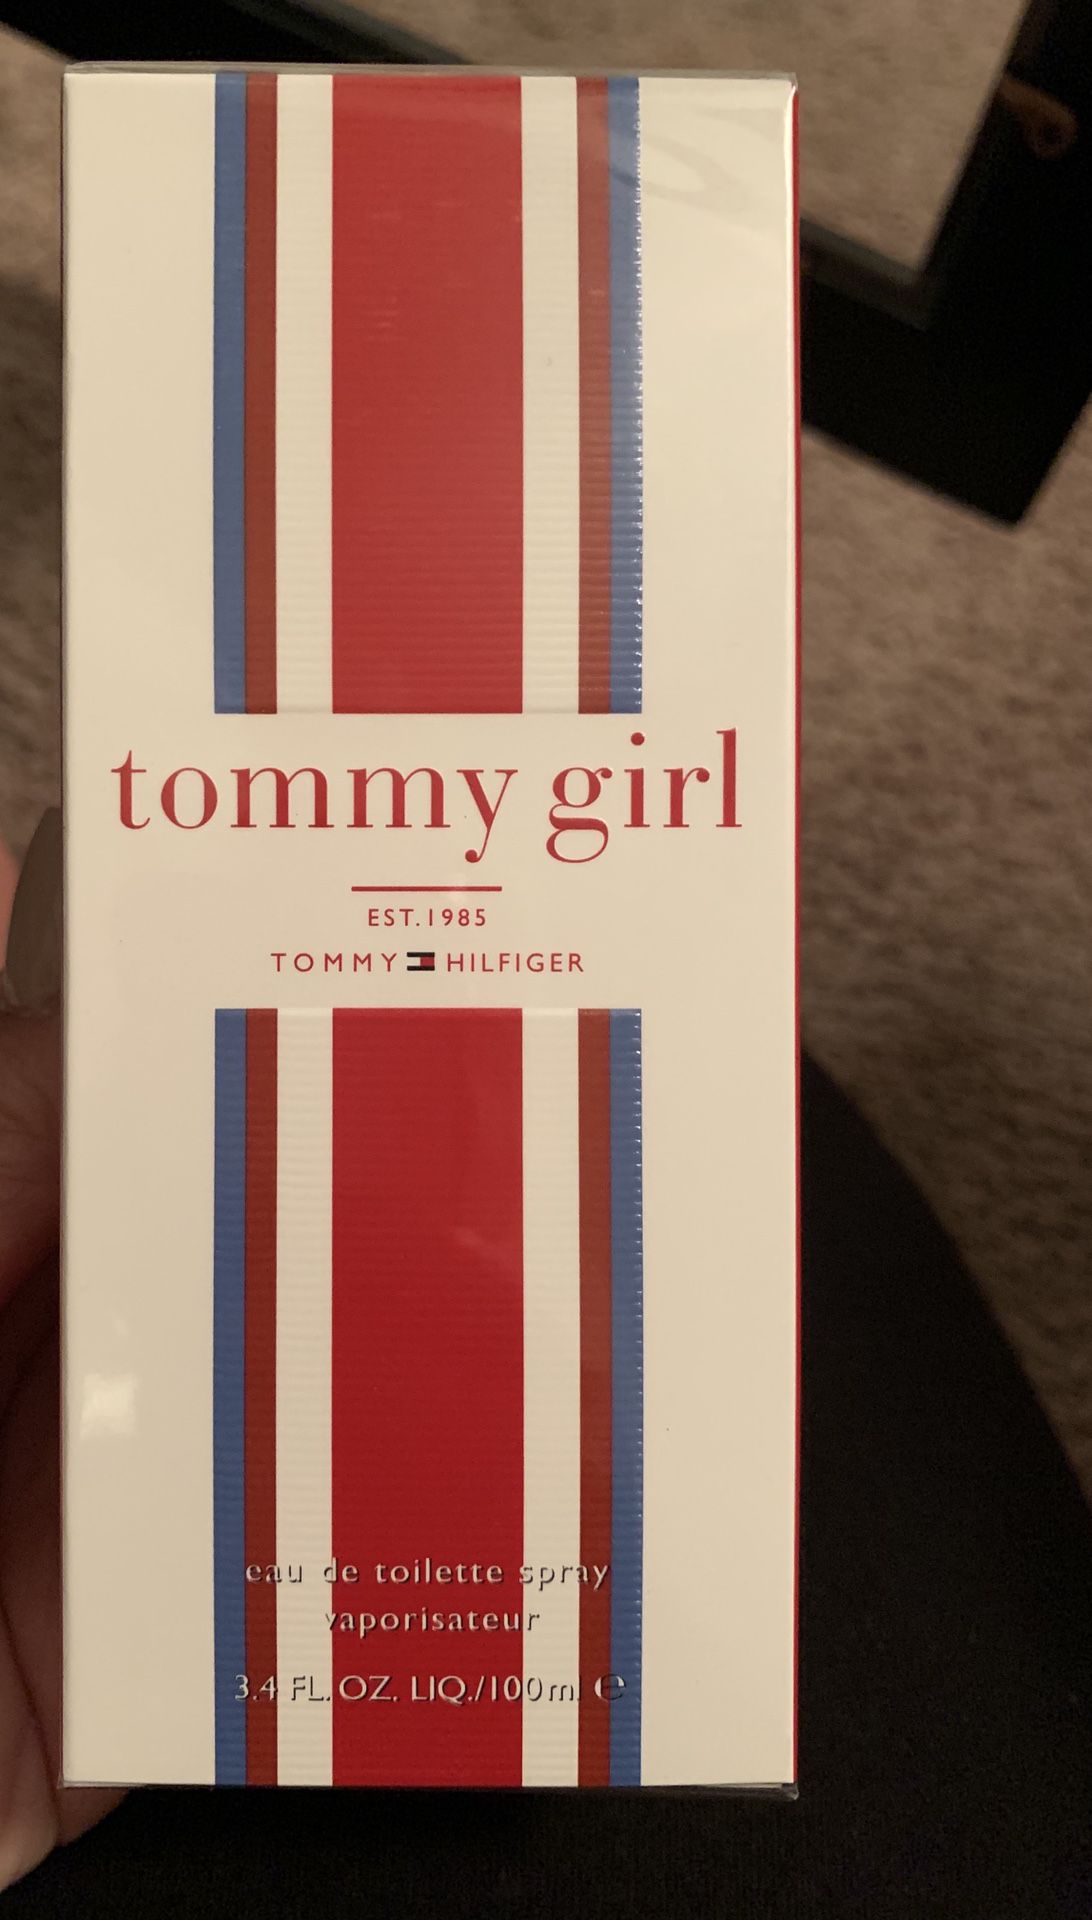 Tommy girl perfume